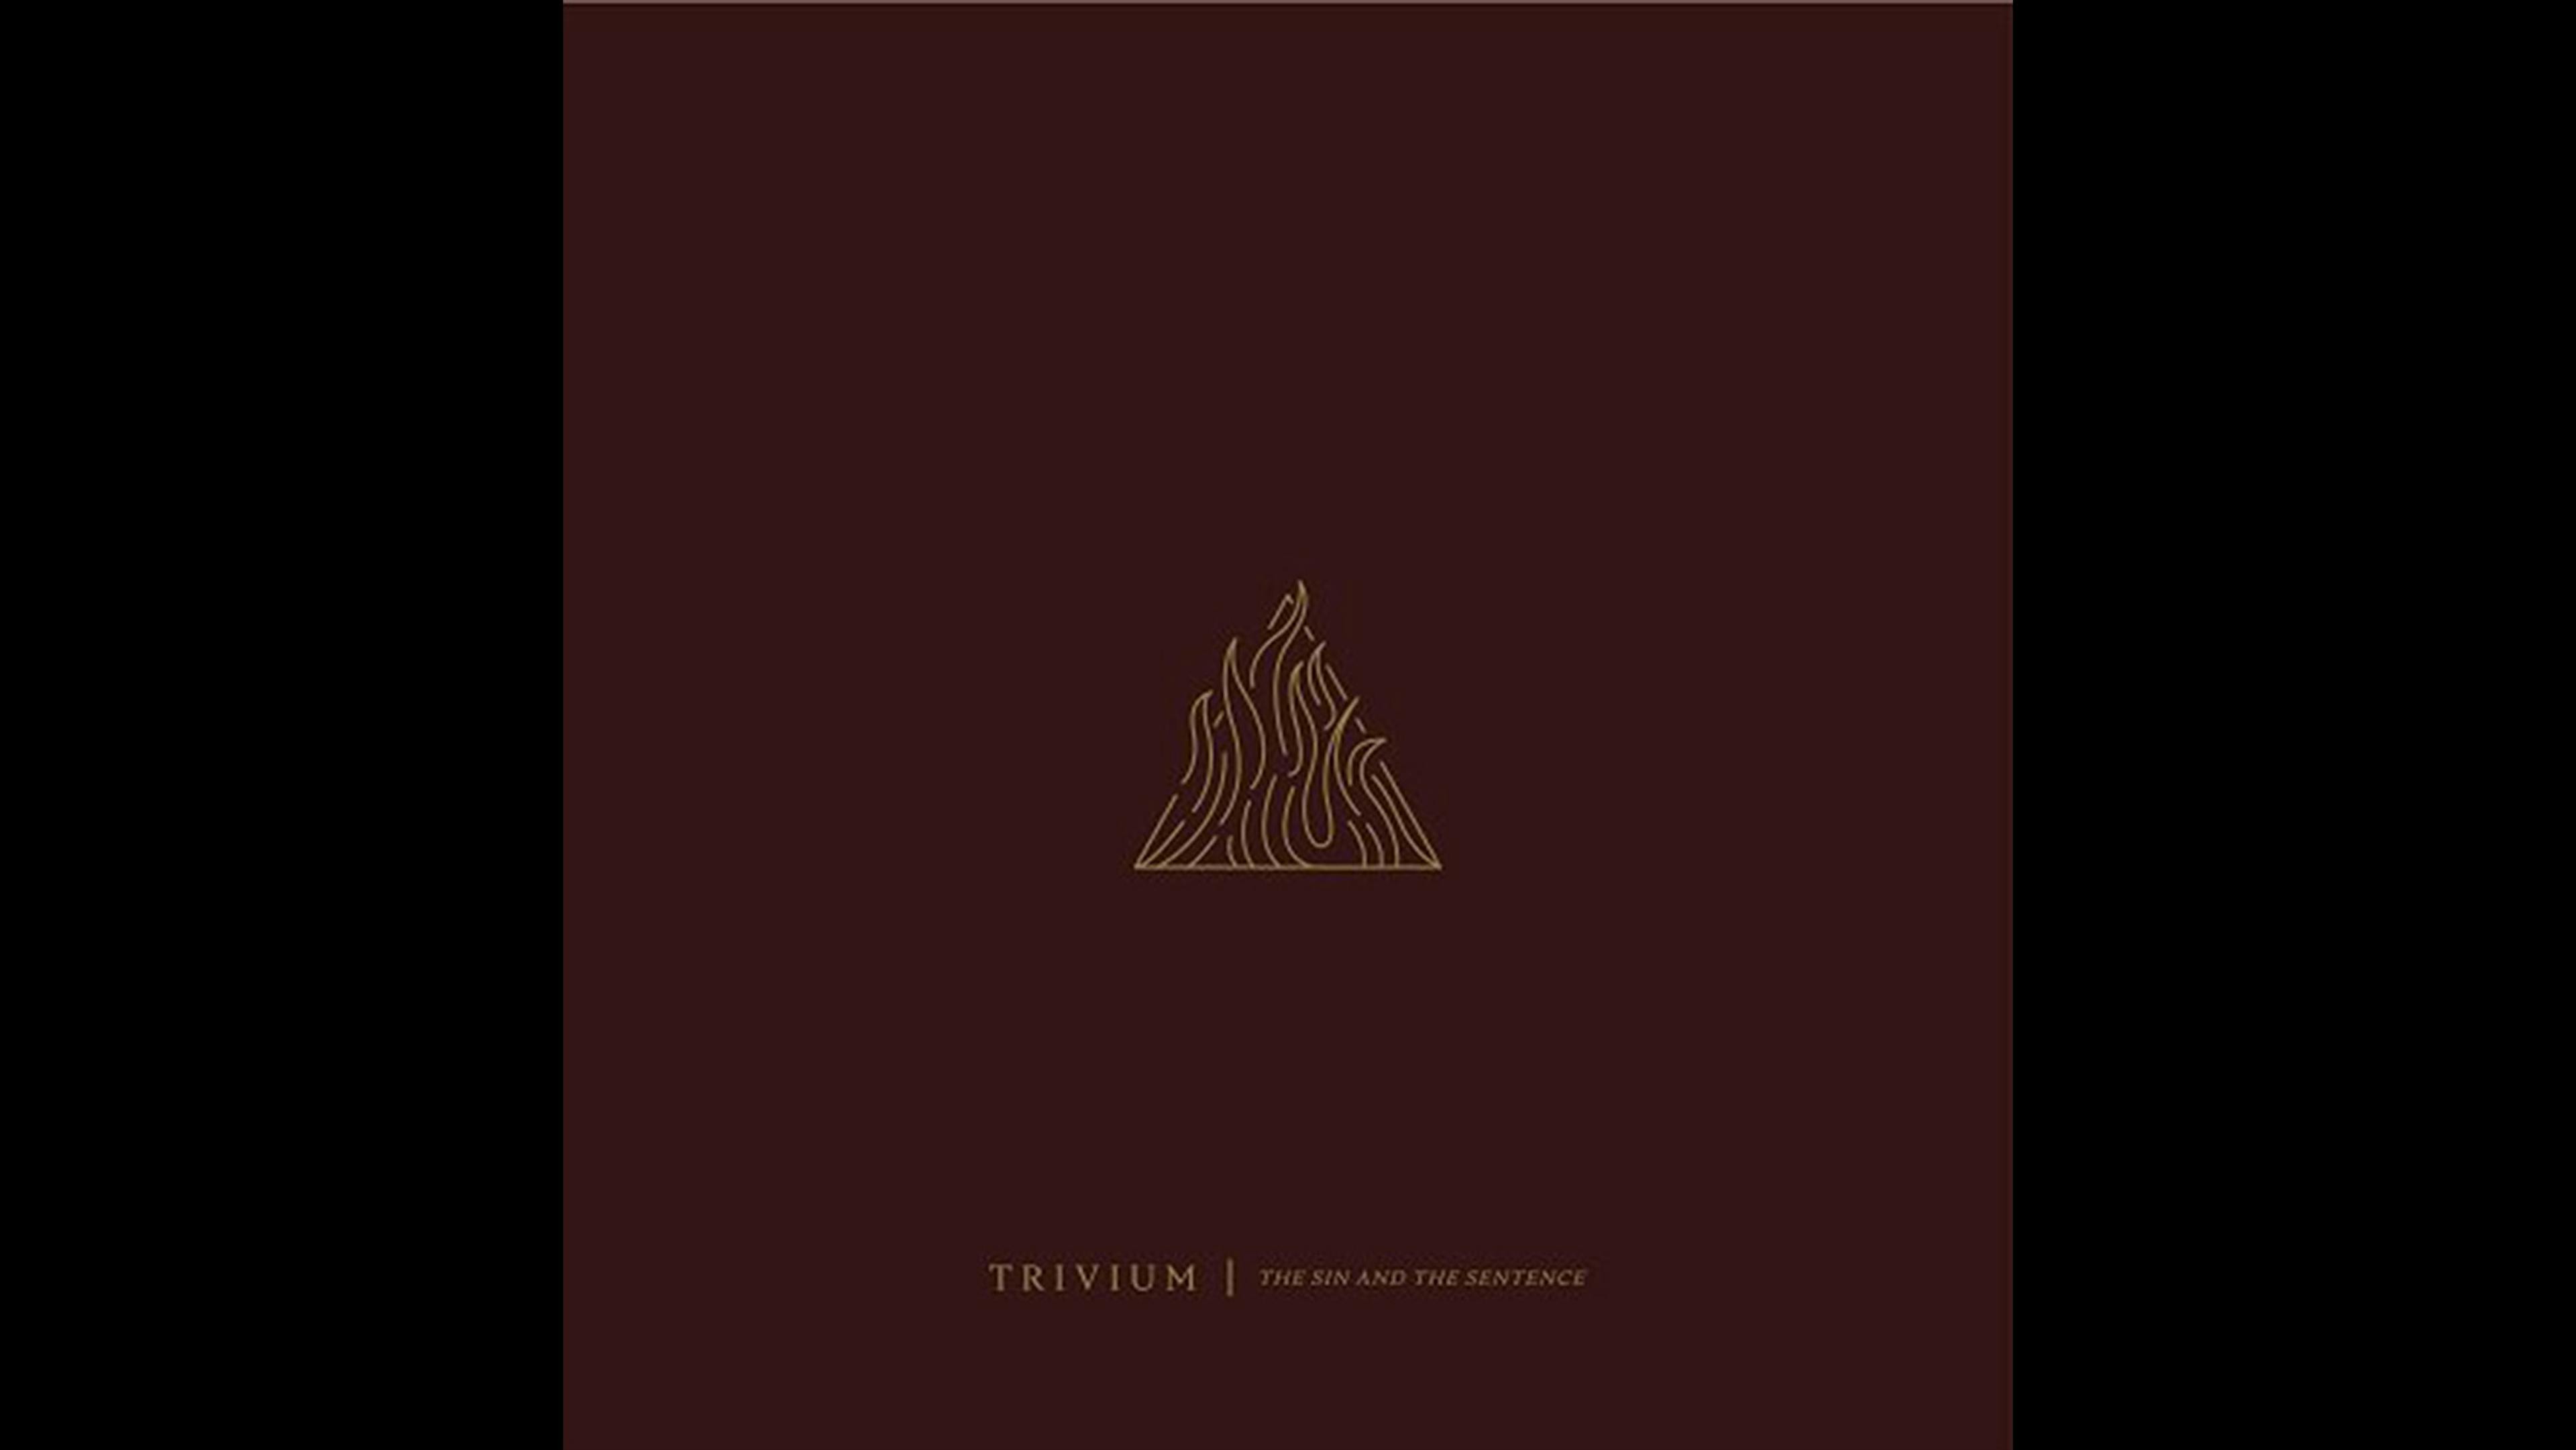 “I love this one. Trivium are good friends of mine, and when you look at how they blew up with Ascendancy (2005) most bands would find it hard to maintain that momentum, but they’ve worked so hard for so long to earn their stripes. They’ve proven themselves metal staples, and I think this is their best record since Ascendancy. It’s that good.”